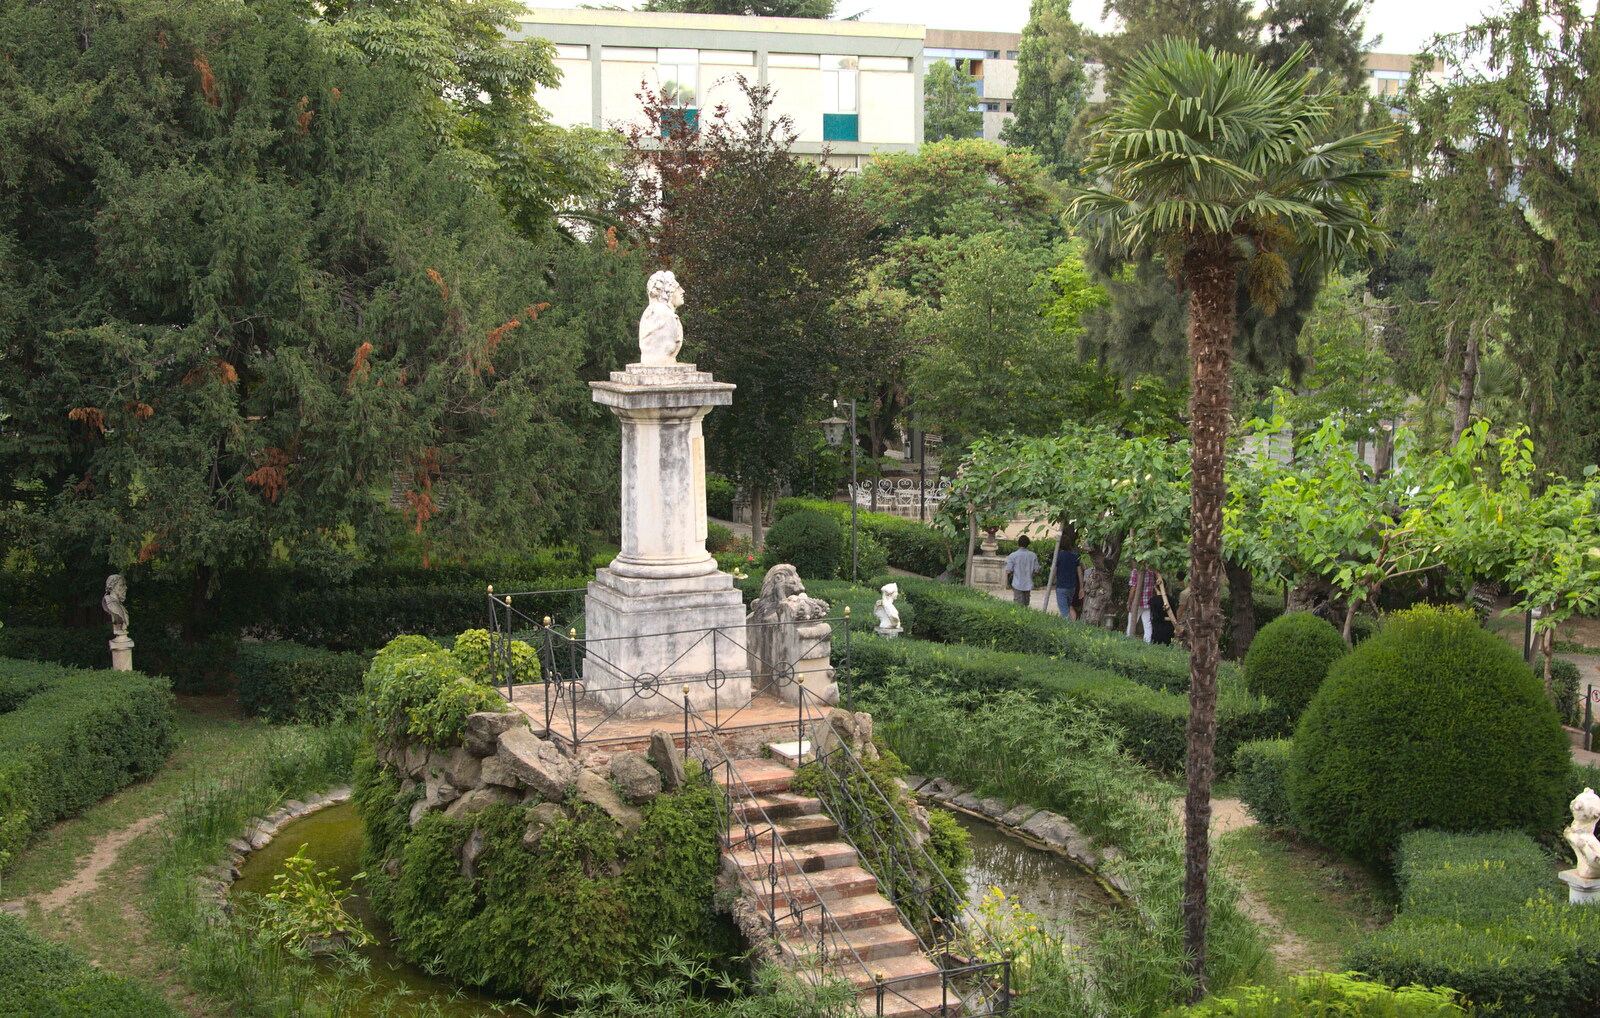 The gardens of Cordola Martí from The Open Education Challenge, Barcelona, Catalonia - 13th July 2014